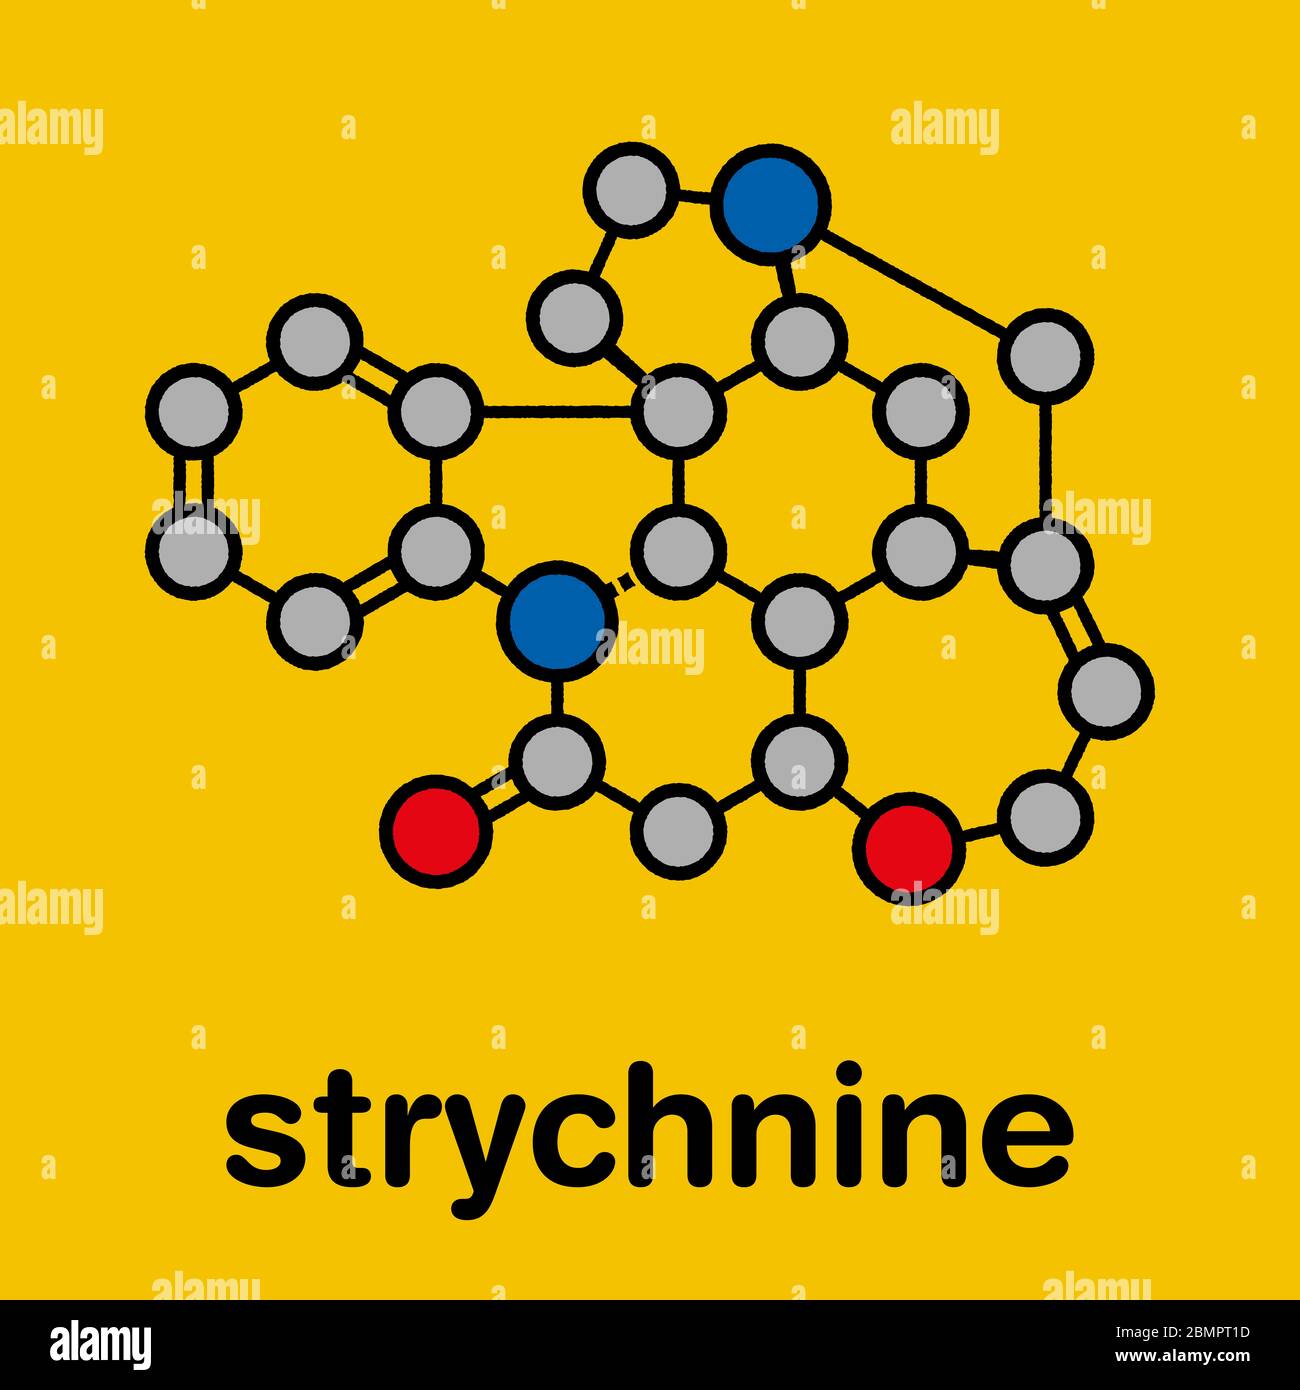 Strychnine poisonous alkaloid molecule. Isolated from Strychnos nux-vomica tree. Stylized skeletal formula (chemical structure): Atoms are shown as color-coded circles: hydrogen (hidden), carbon (grey), oxygen (red), nitrogen (blue). Stock Photo